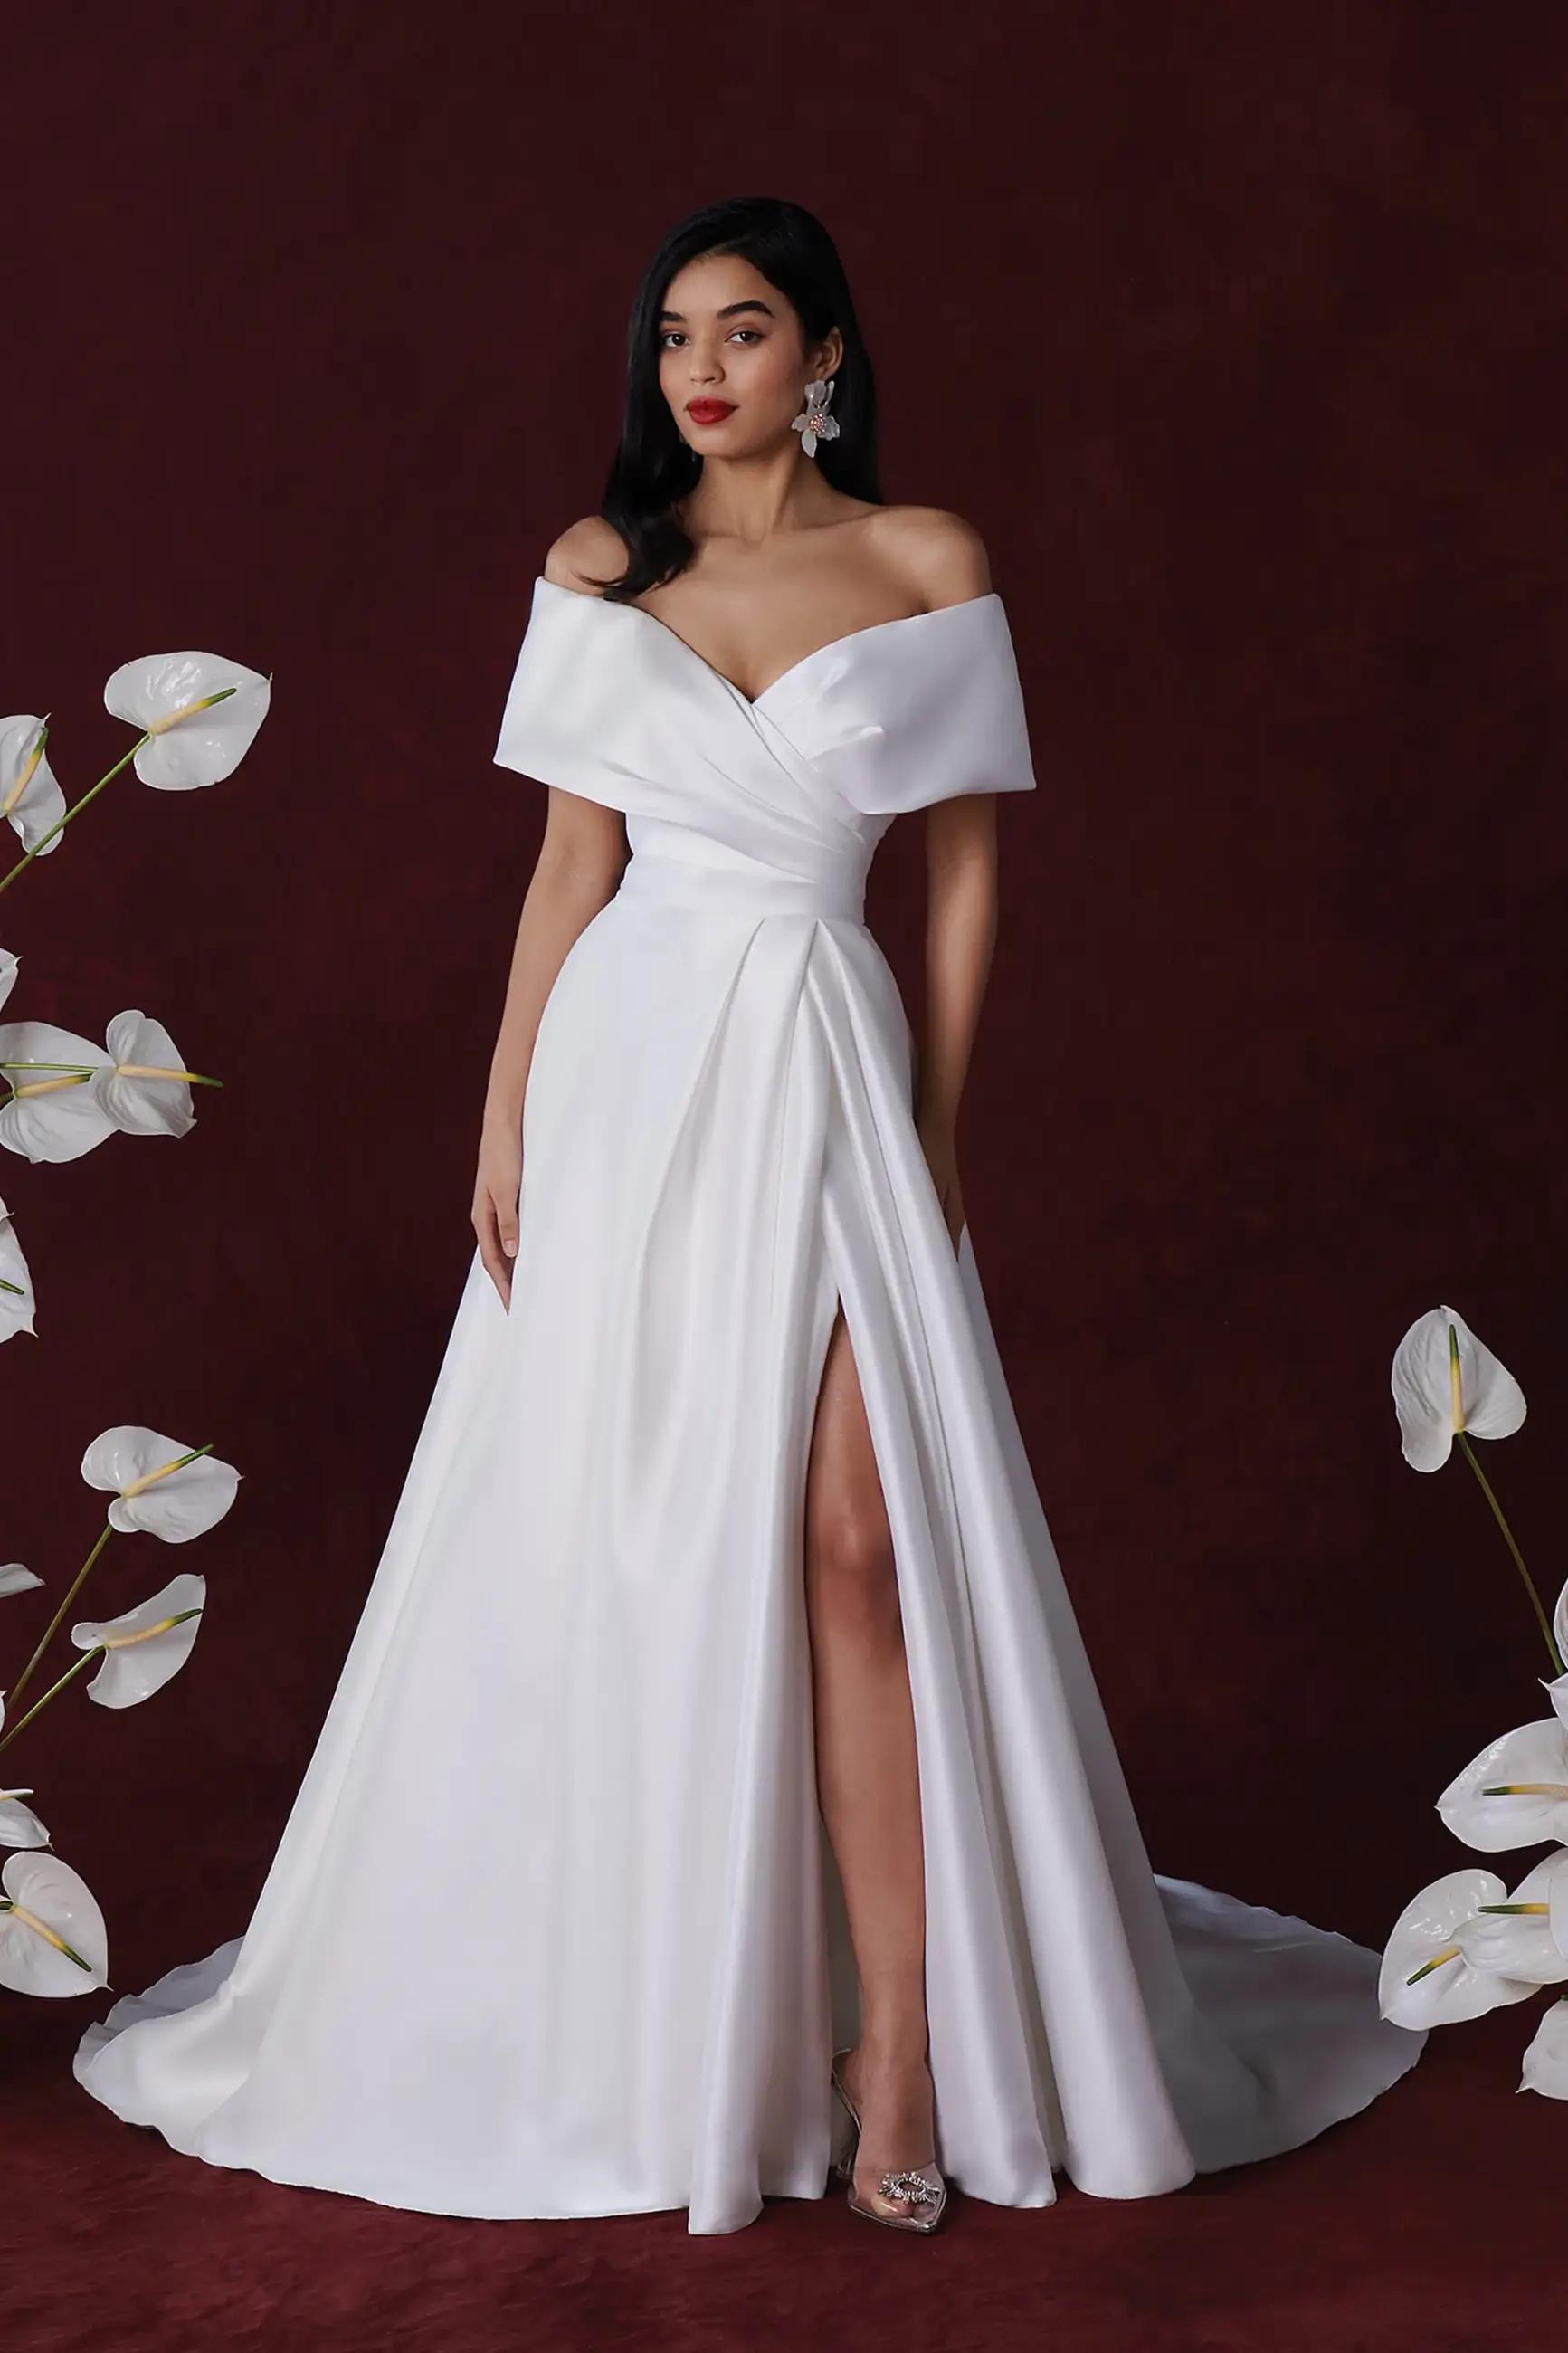 Model wearing a white gown by Justin Alexander